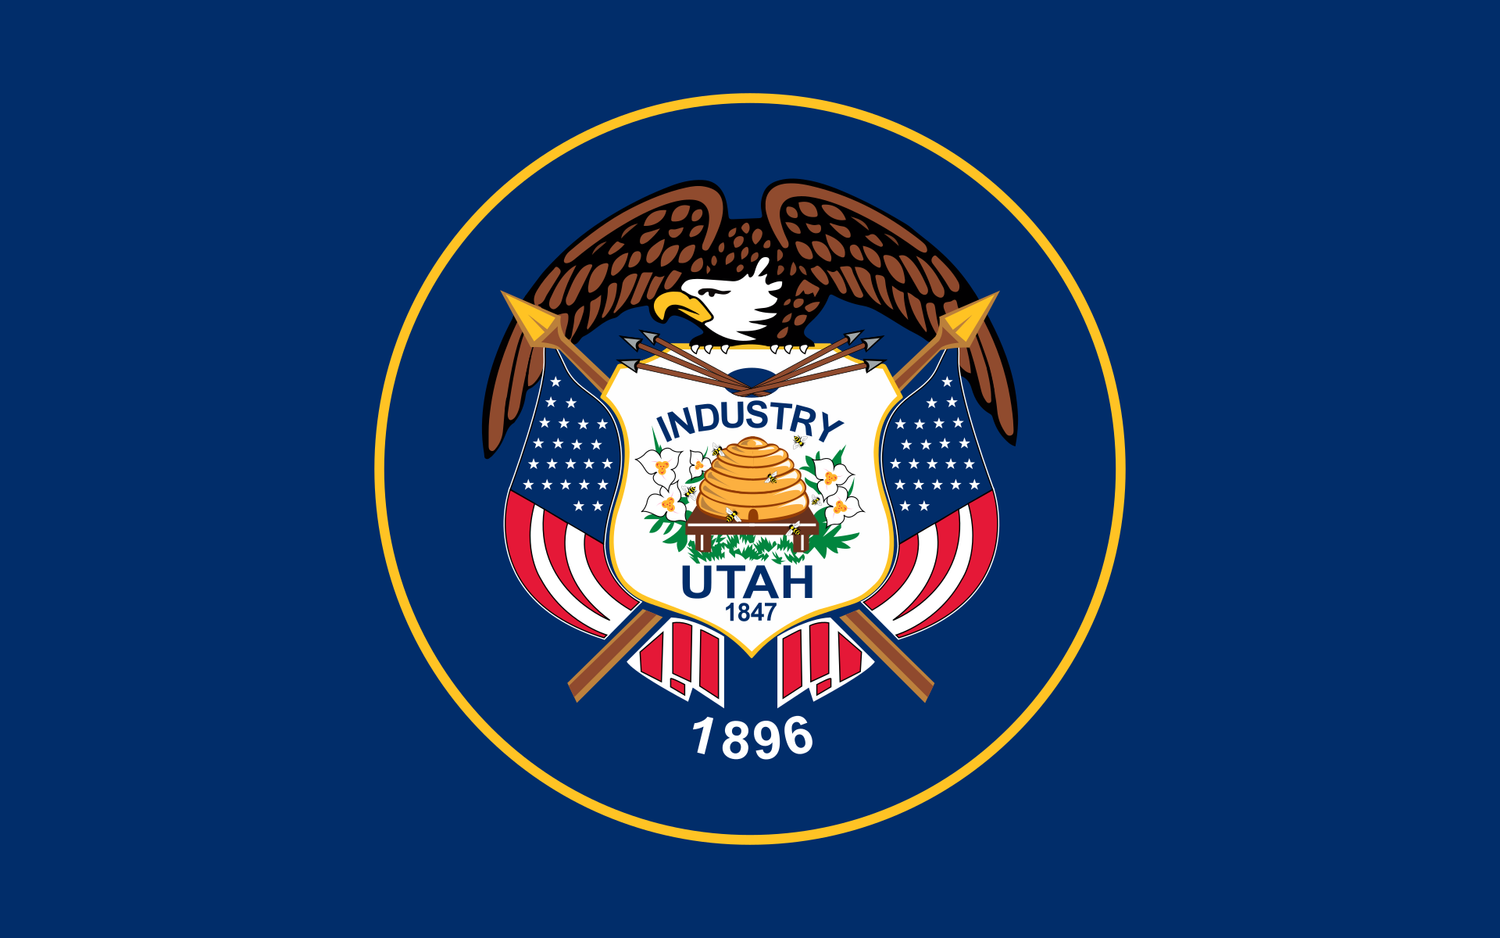 The official state flag of Utah was adopted in 1913 and features a state coat of arms encircled in a golden circle on a field of dark navy blue. - History By Mail